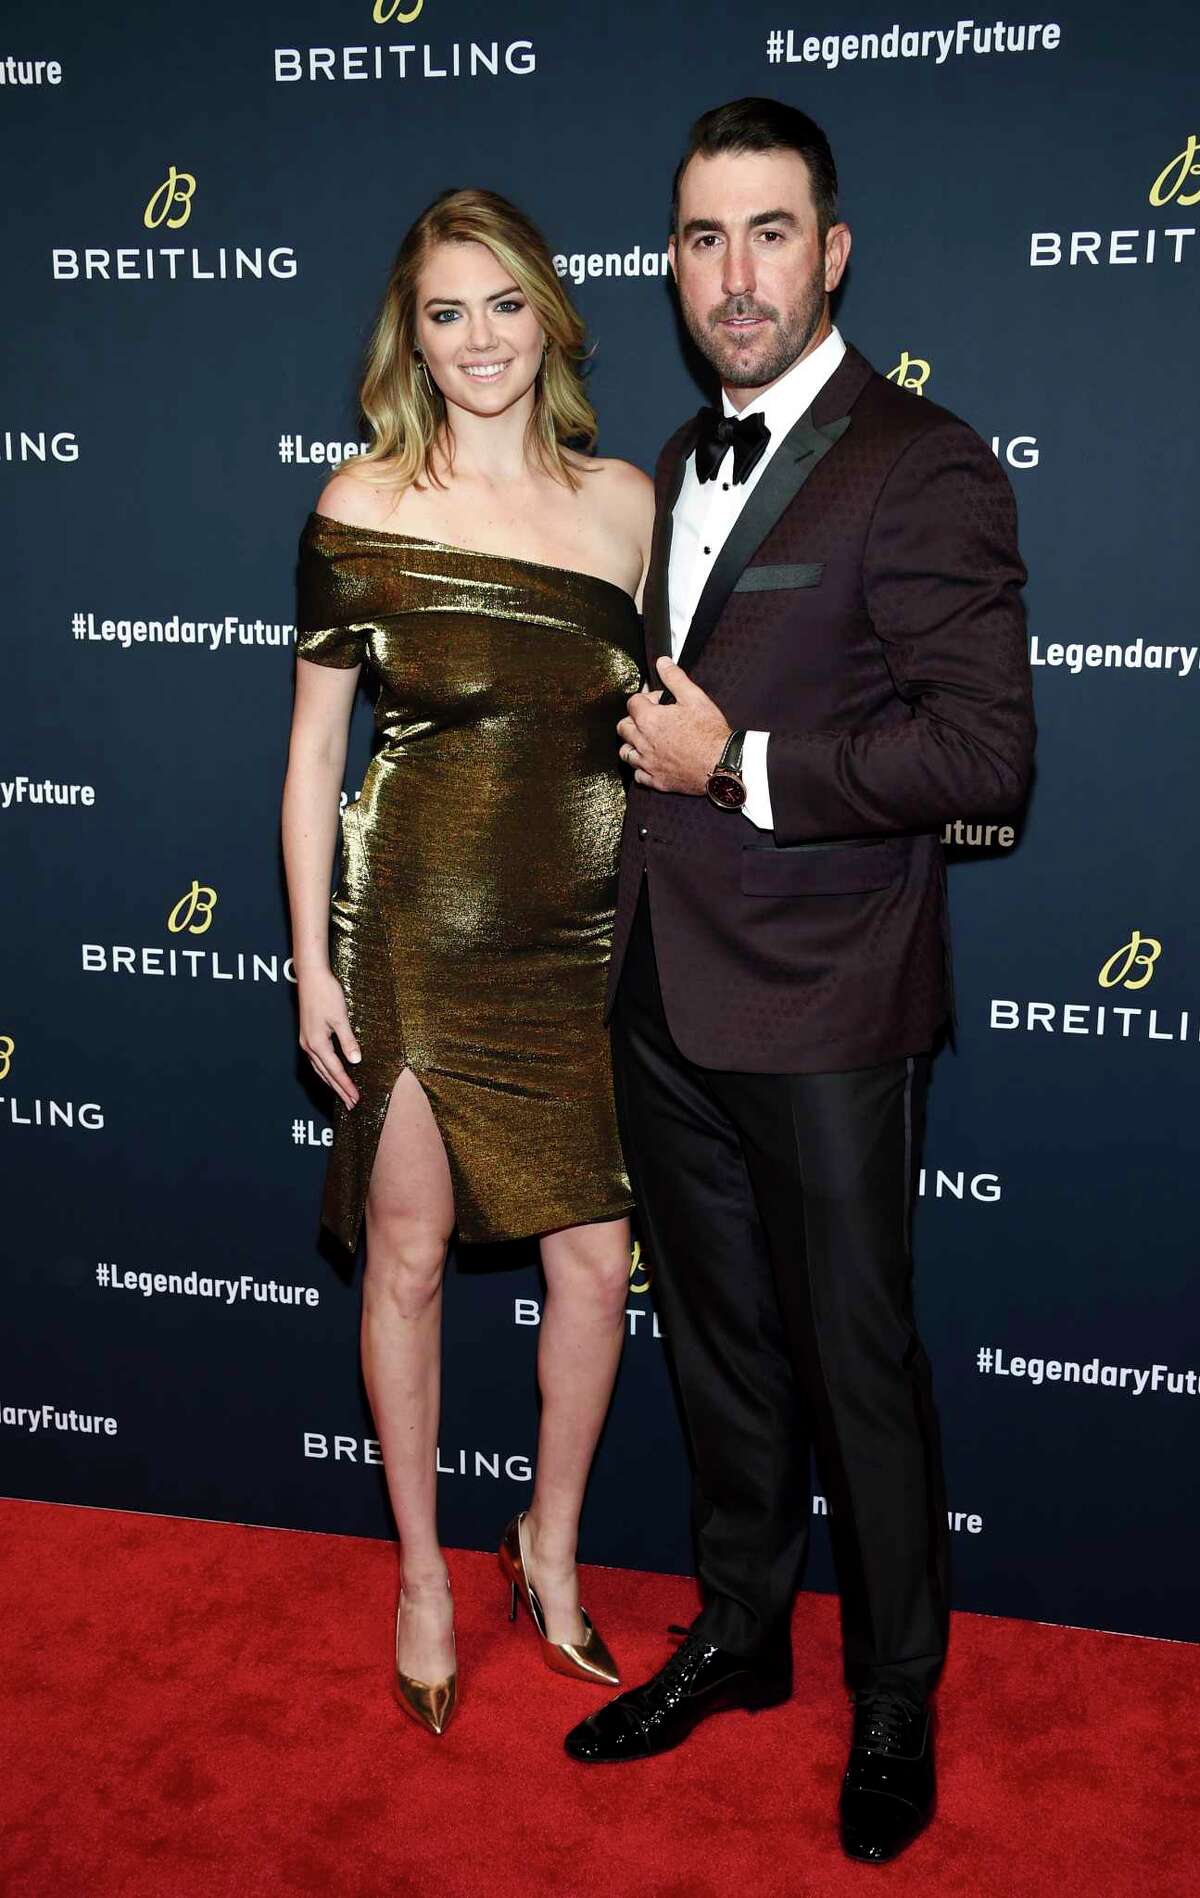 Model Kate Upton and husband professional baseball player Justin Verlander attend the Breitling Global Roadshow event at The Duggal Greenhouse on Thursday, Feb. 22, 2018, in New York. (Photo by Evan Agostini/Invision/AP)